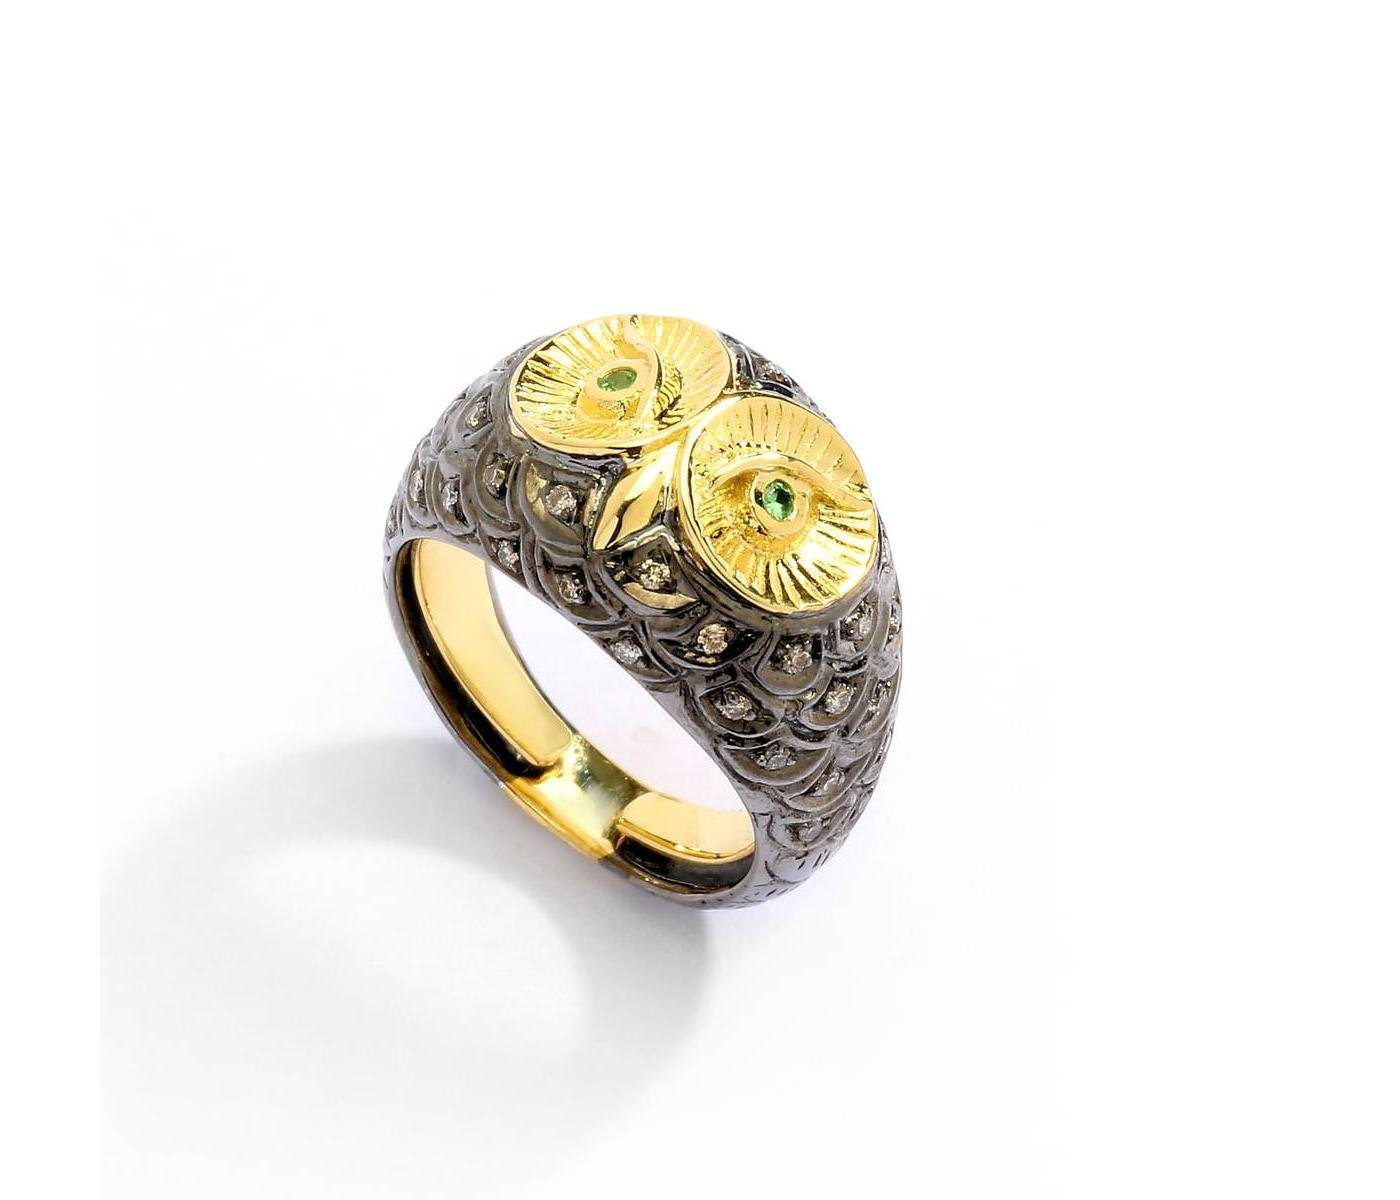 Ring by Syna